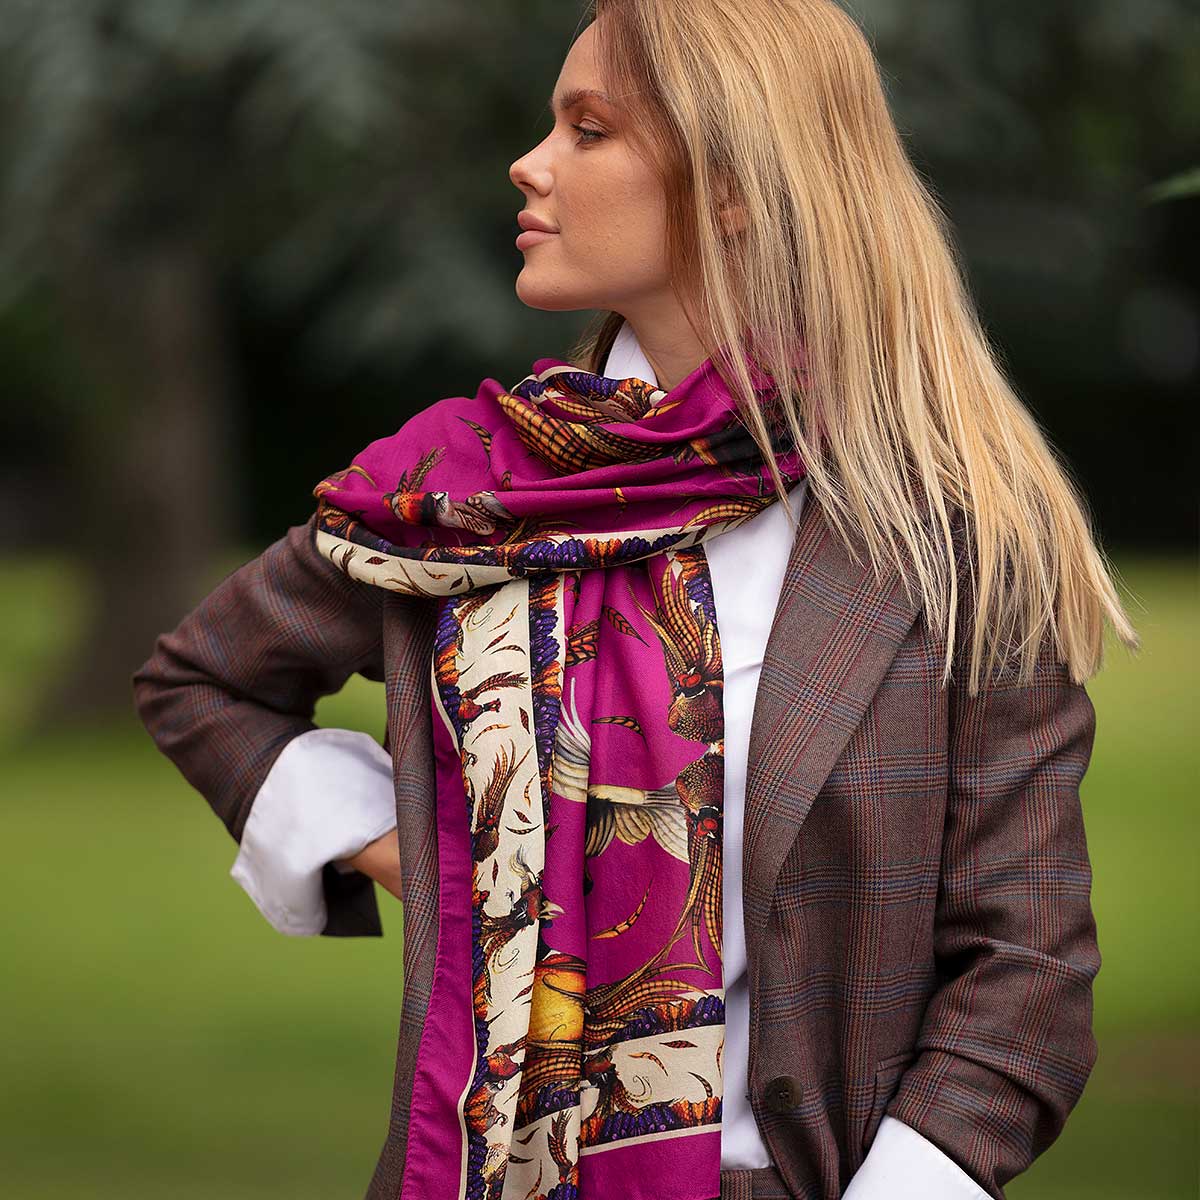 The Cowel Neck Drape, the best way to tie a classic or rectangluar scarf.